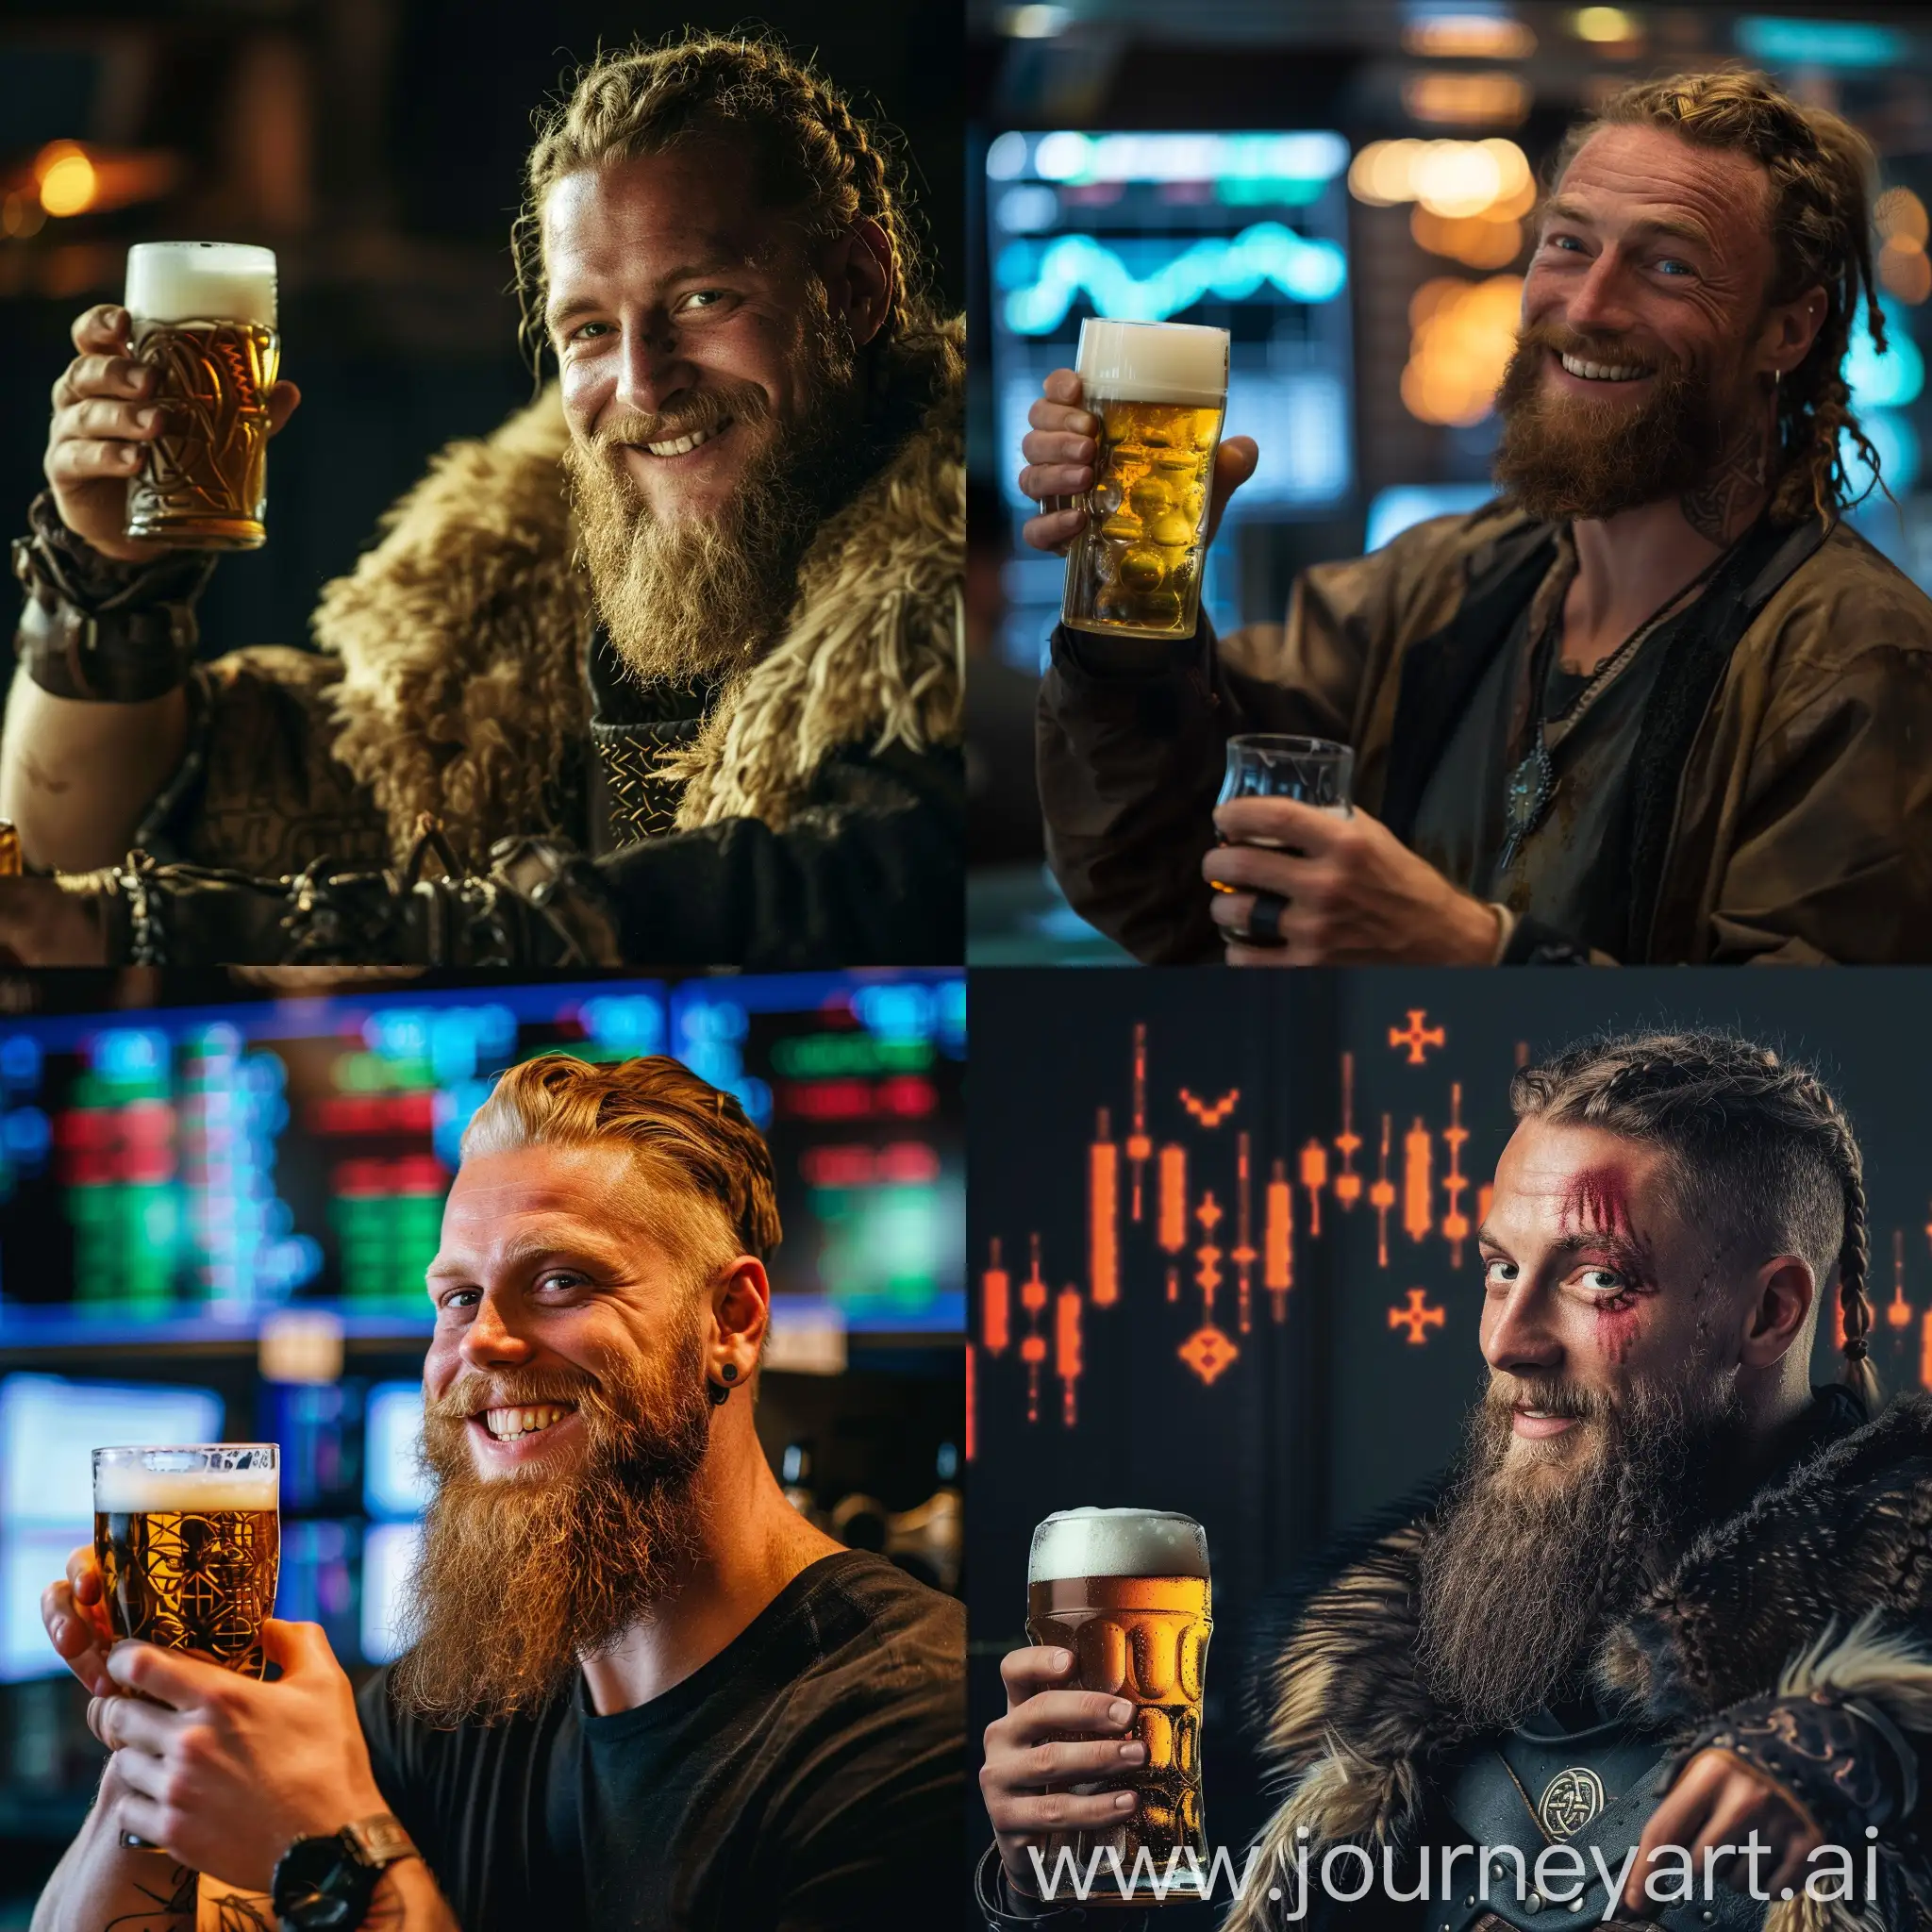 Ragnar buy a stock dip with happy face and holding a beer